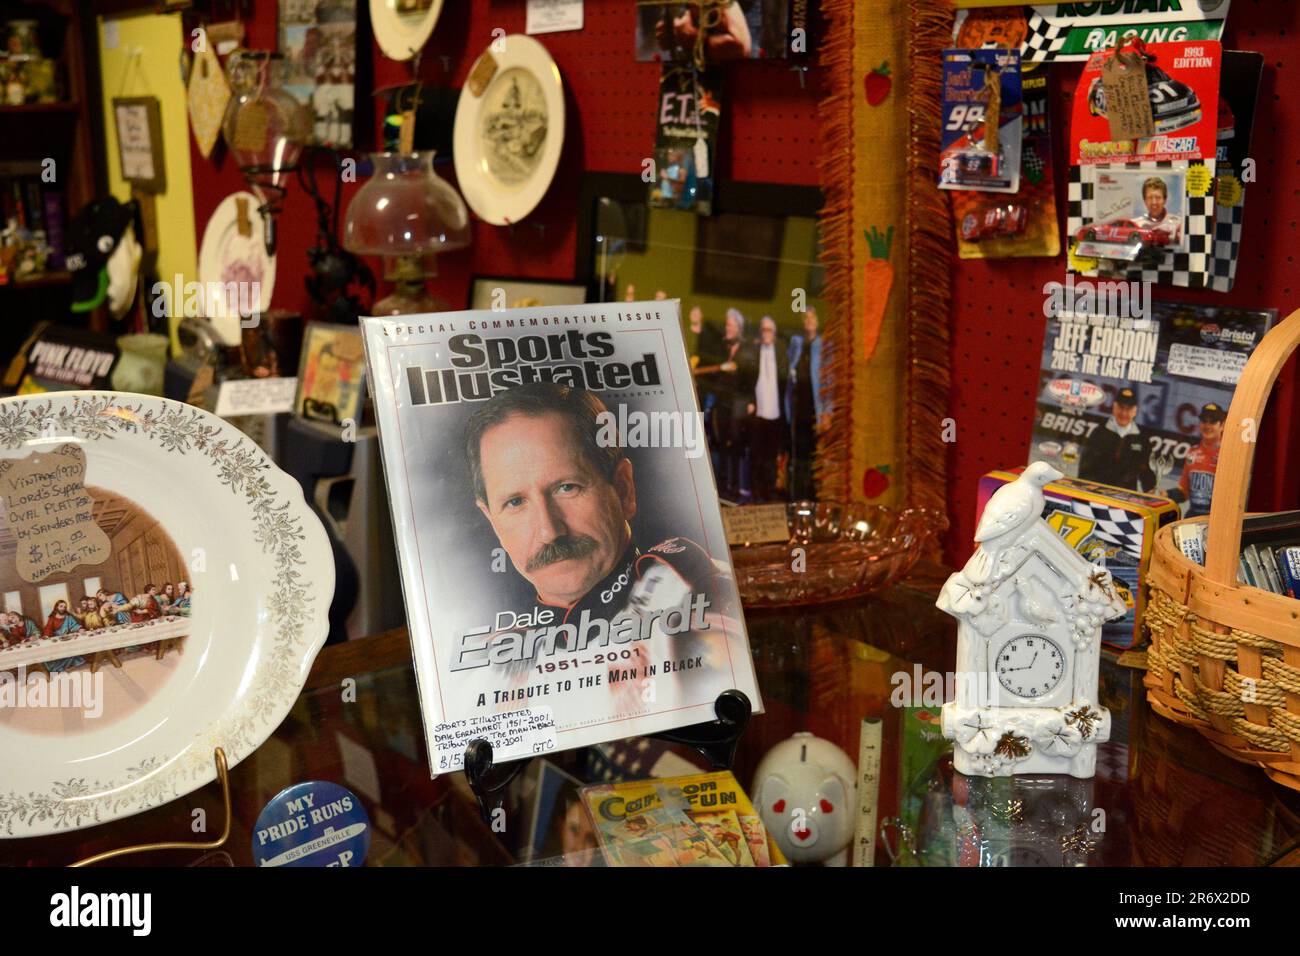 A 2001 commemorative issue of Sports Illustrated magazine featuring NASCAR driver Dale Earnhardt Sr. for sale in an antique shop in Bridstol, Virginia Stock Photo